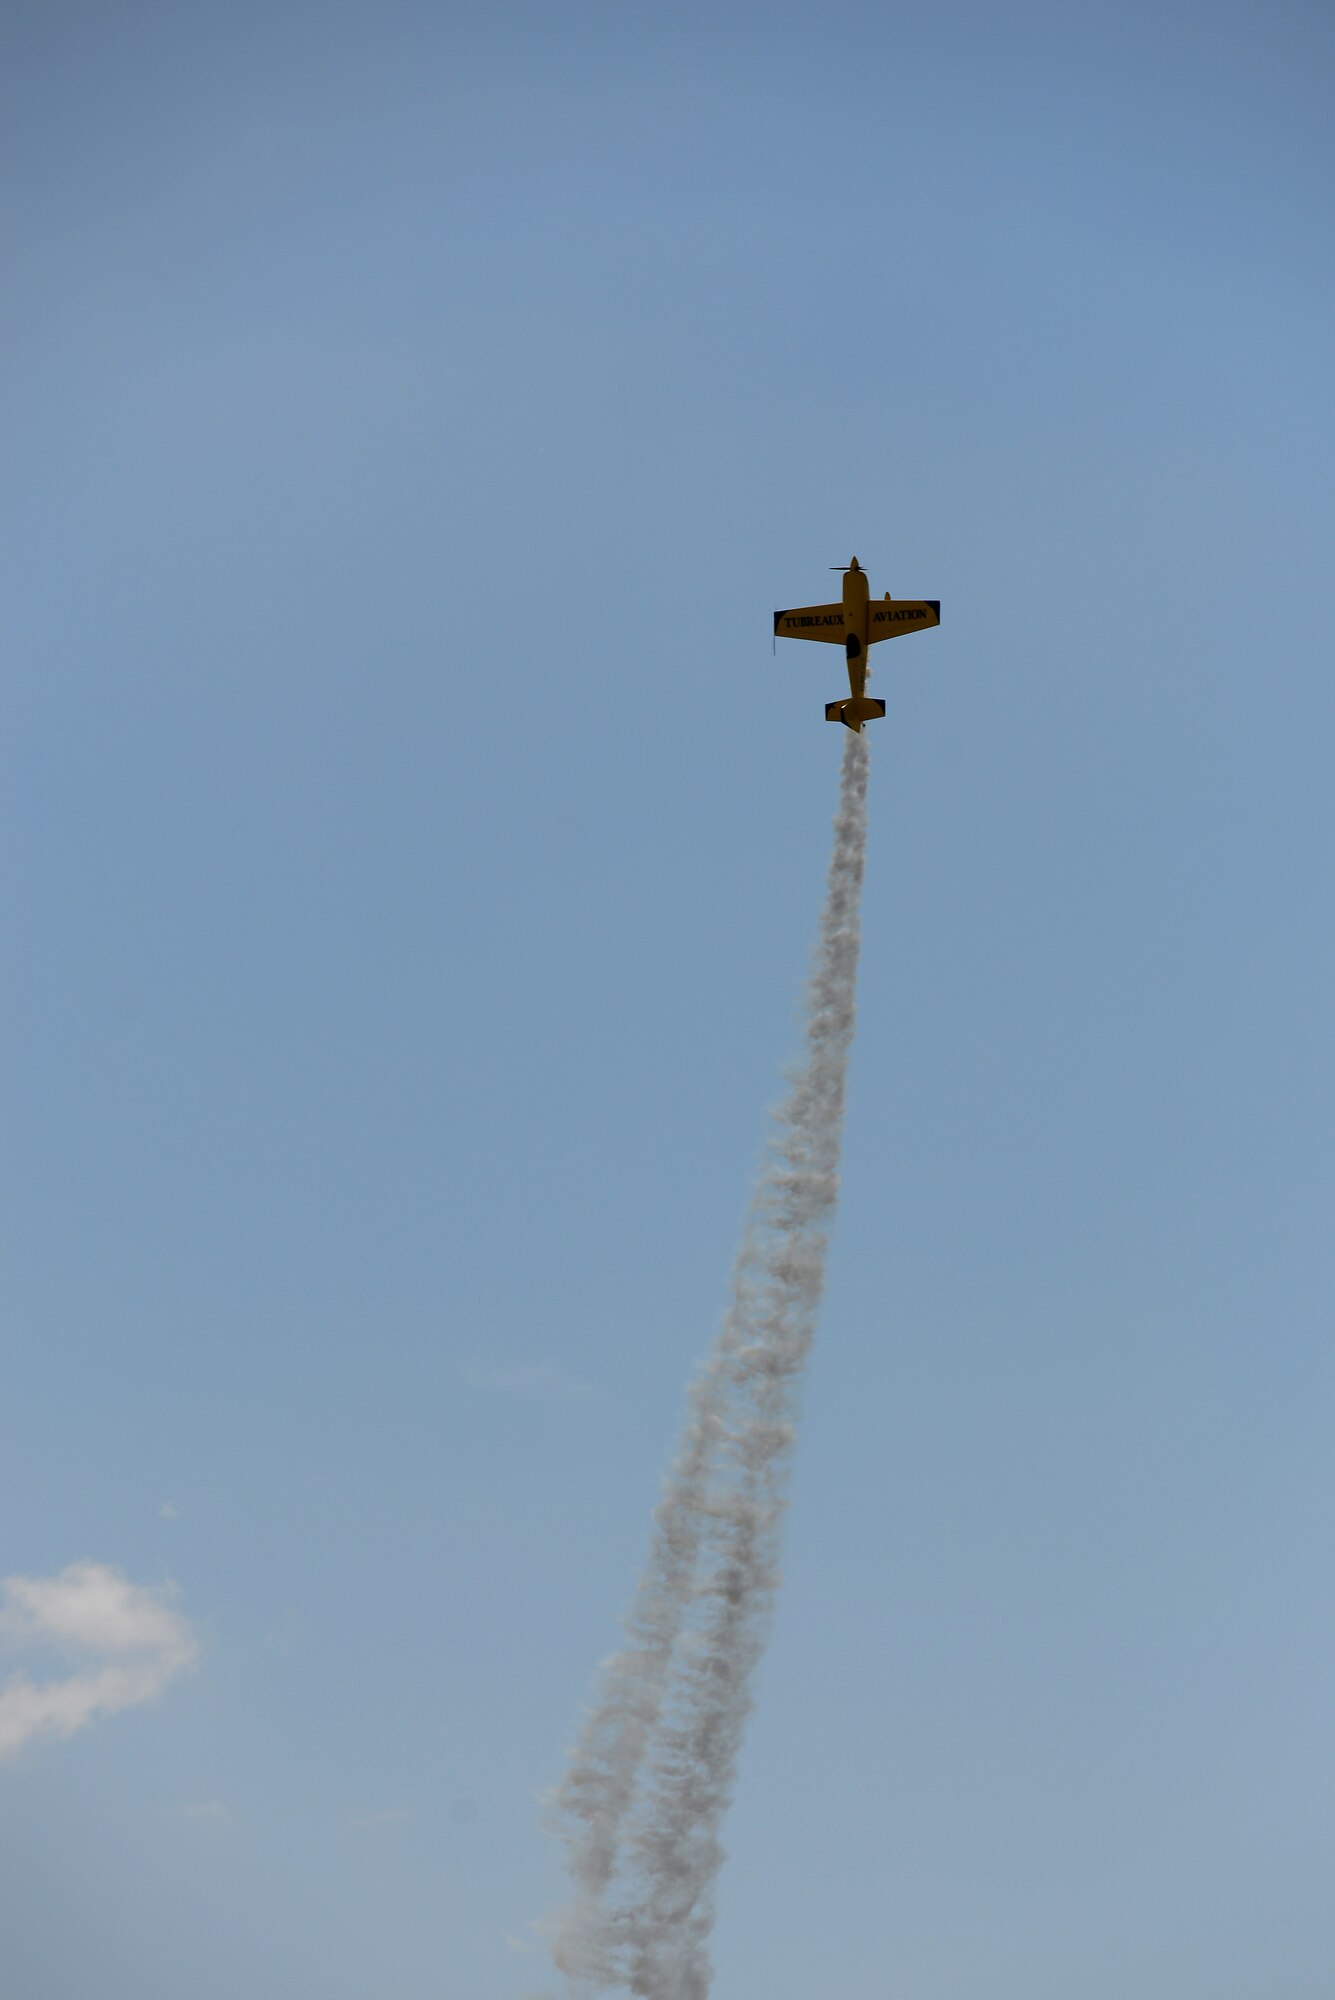 Kevin Coleman performs during the 100th Centennial Celebration Air Show, June 10, 2017, at Scott Air Force Base, Ill. Kevin has accumulated more than 2500 hours of flying time. He has been recognized as the highest placing contender at the 2007 Aerobatic Championship, and the next year clinched third place at the same event. He is contracted to perform year-round in the air show circuit across the country, and in 2015, a lifetime of practice paid off when he earned a position on the U.S. Advanced Aerobatic Team – the Olympics of aviation. (U.S. Air Force photo by Tech. Sgt. Jonathan Fowler)